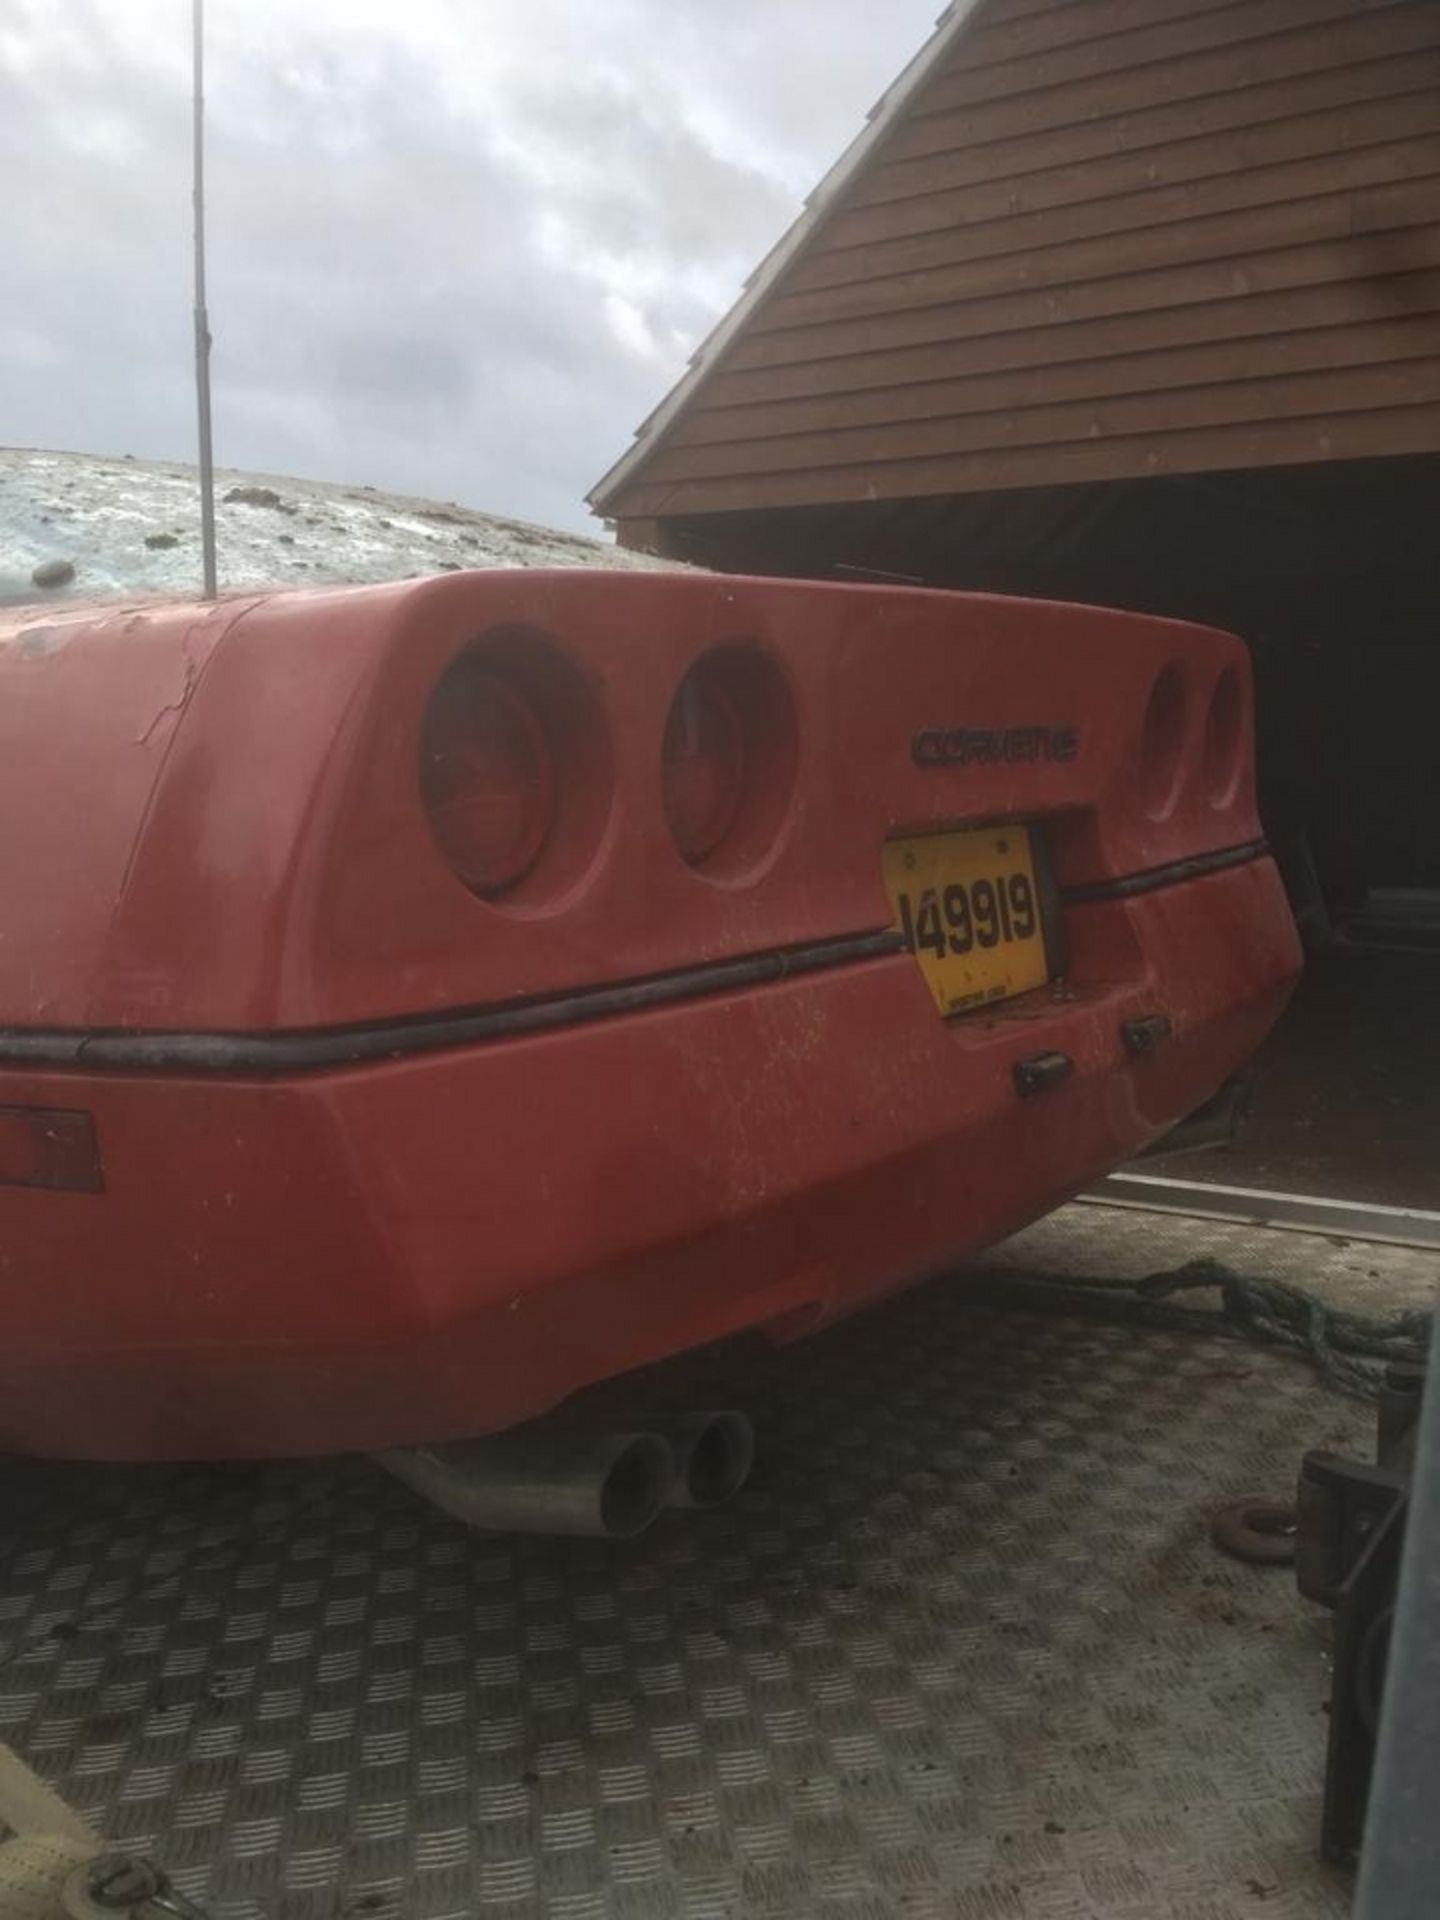 A 1983 Chevrolet Corvette C4 Registration number A541 OEL Chassis number IGIAY0784E5128138 Red and - Image 12 of 15